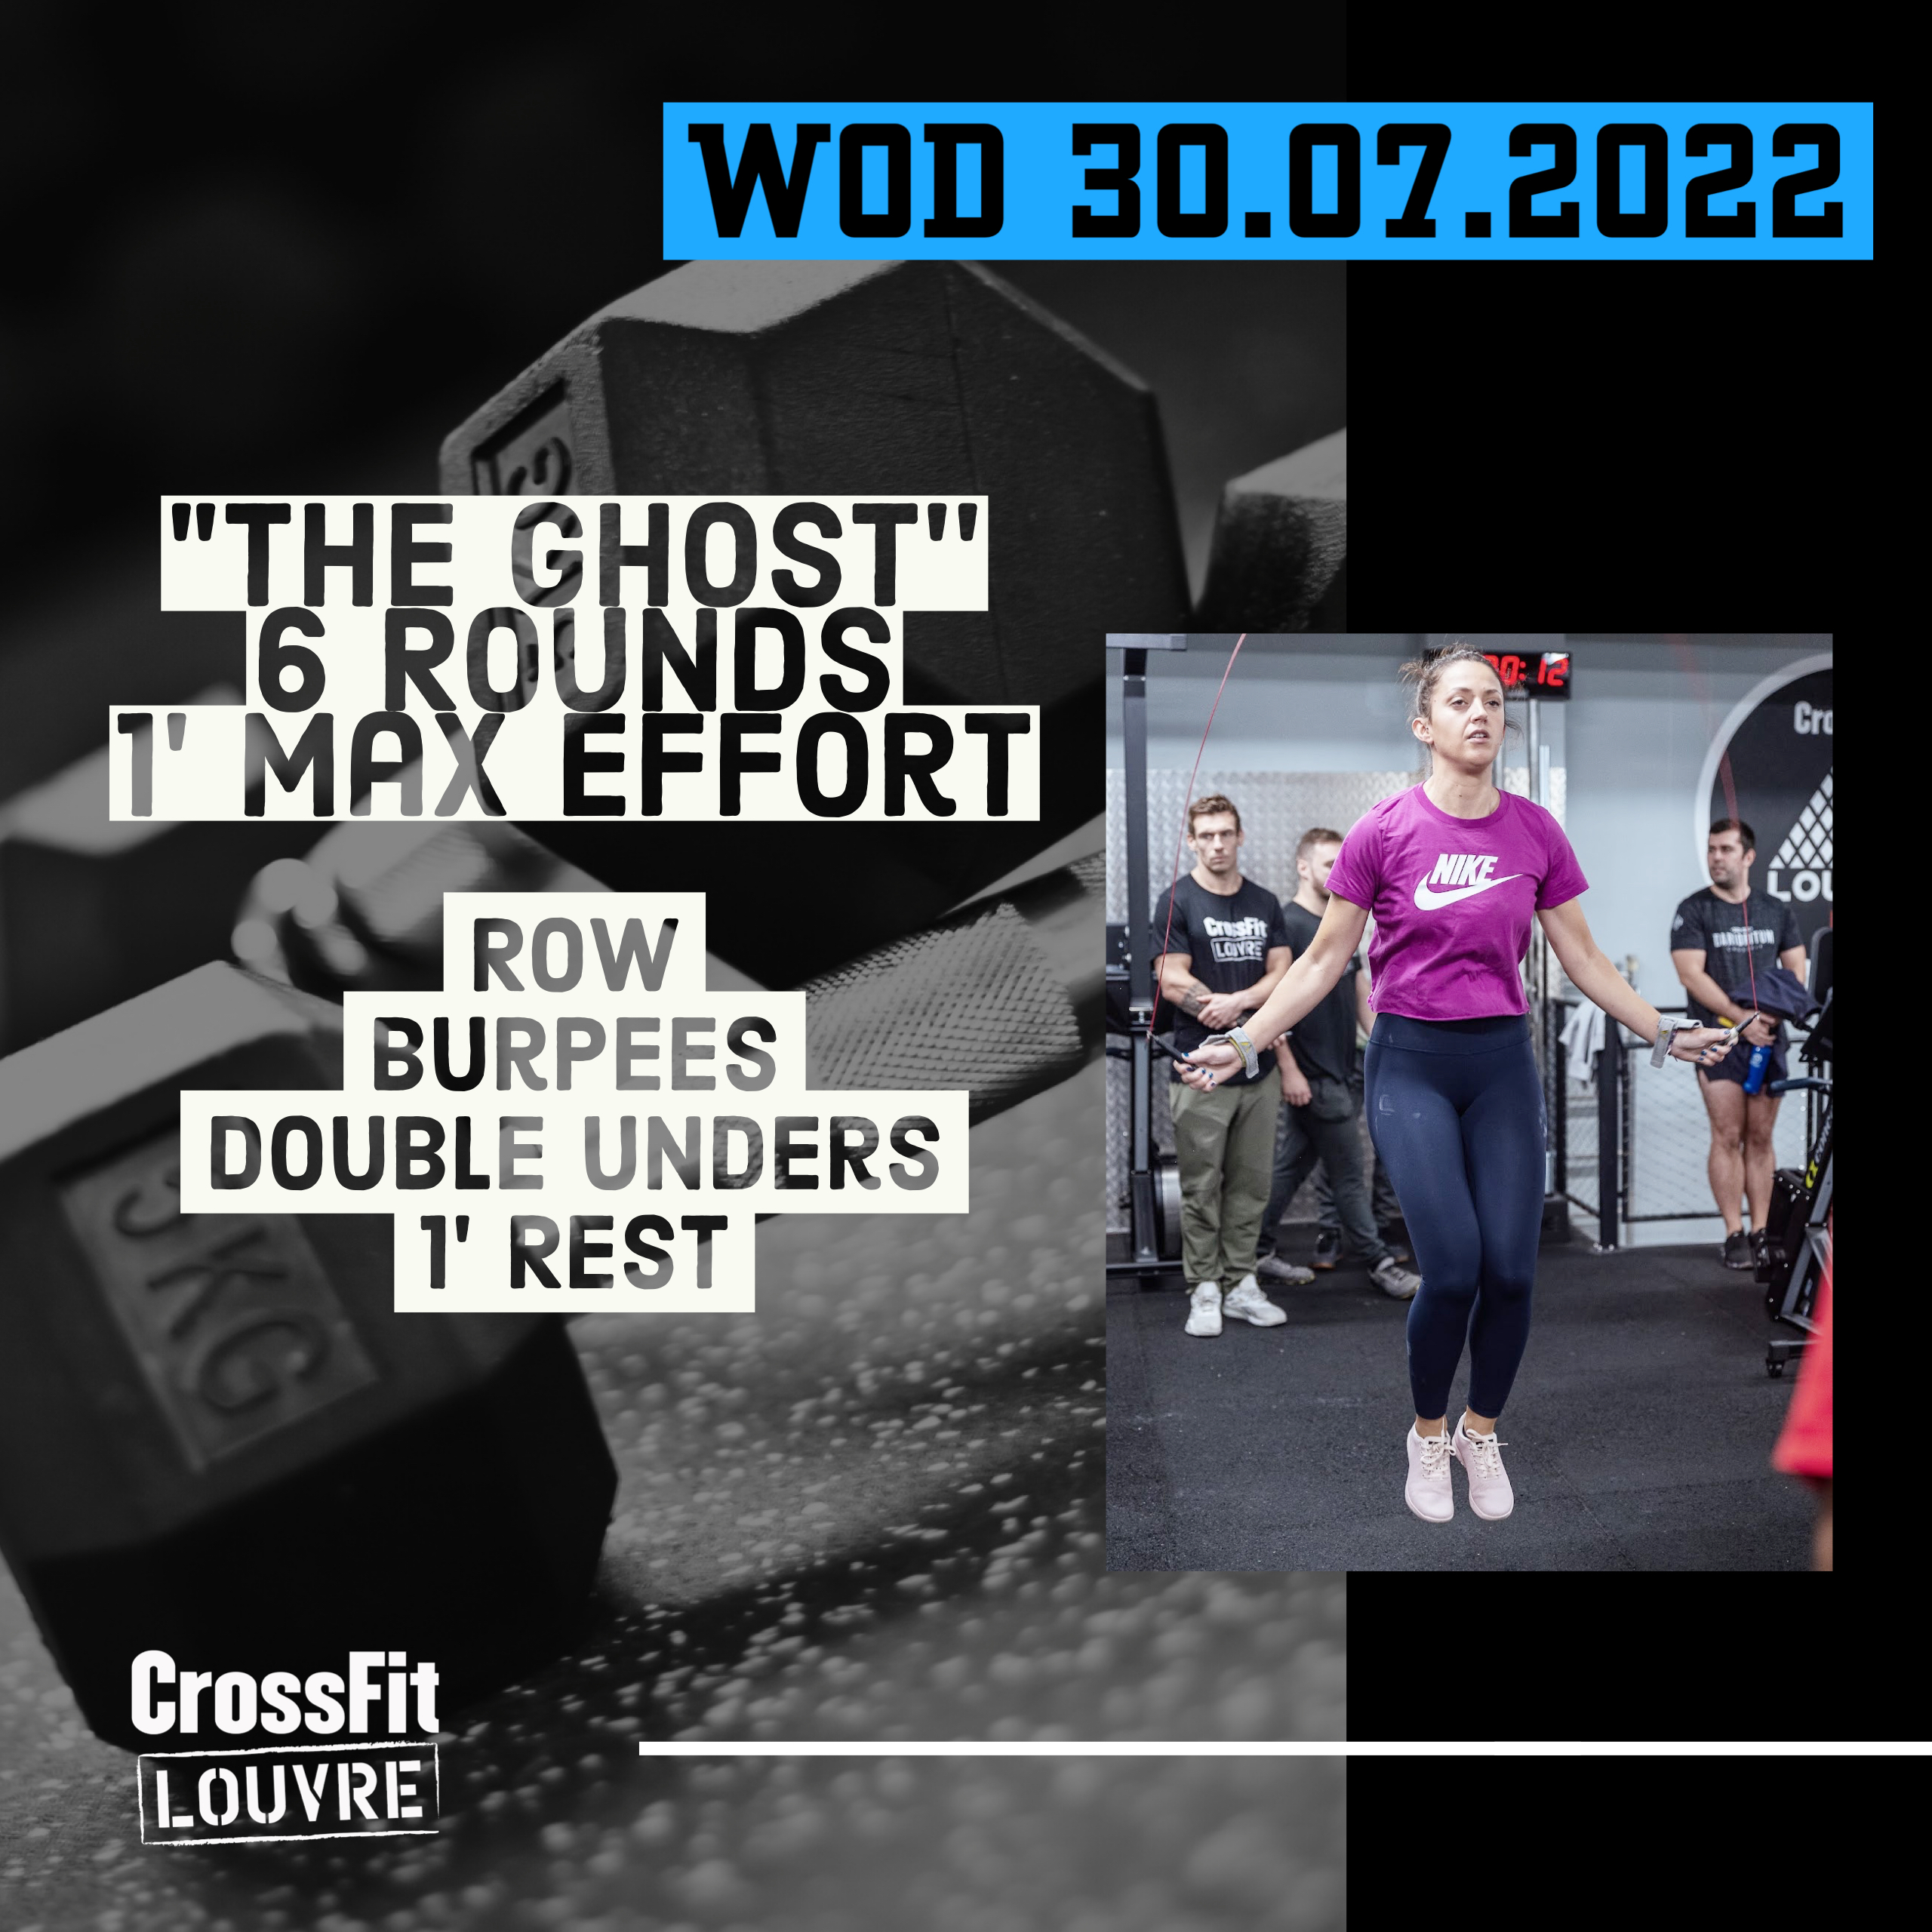 The Ghost Max Effort Row Burpee Double Under